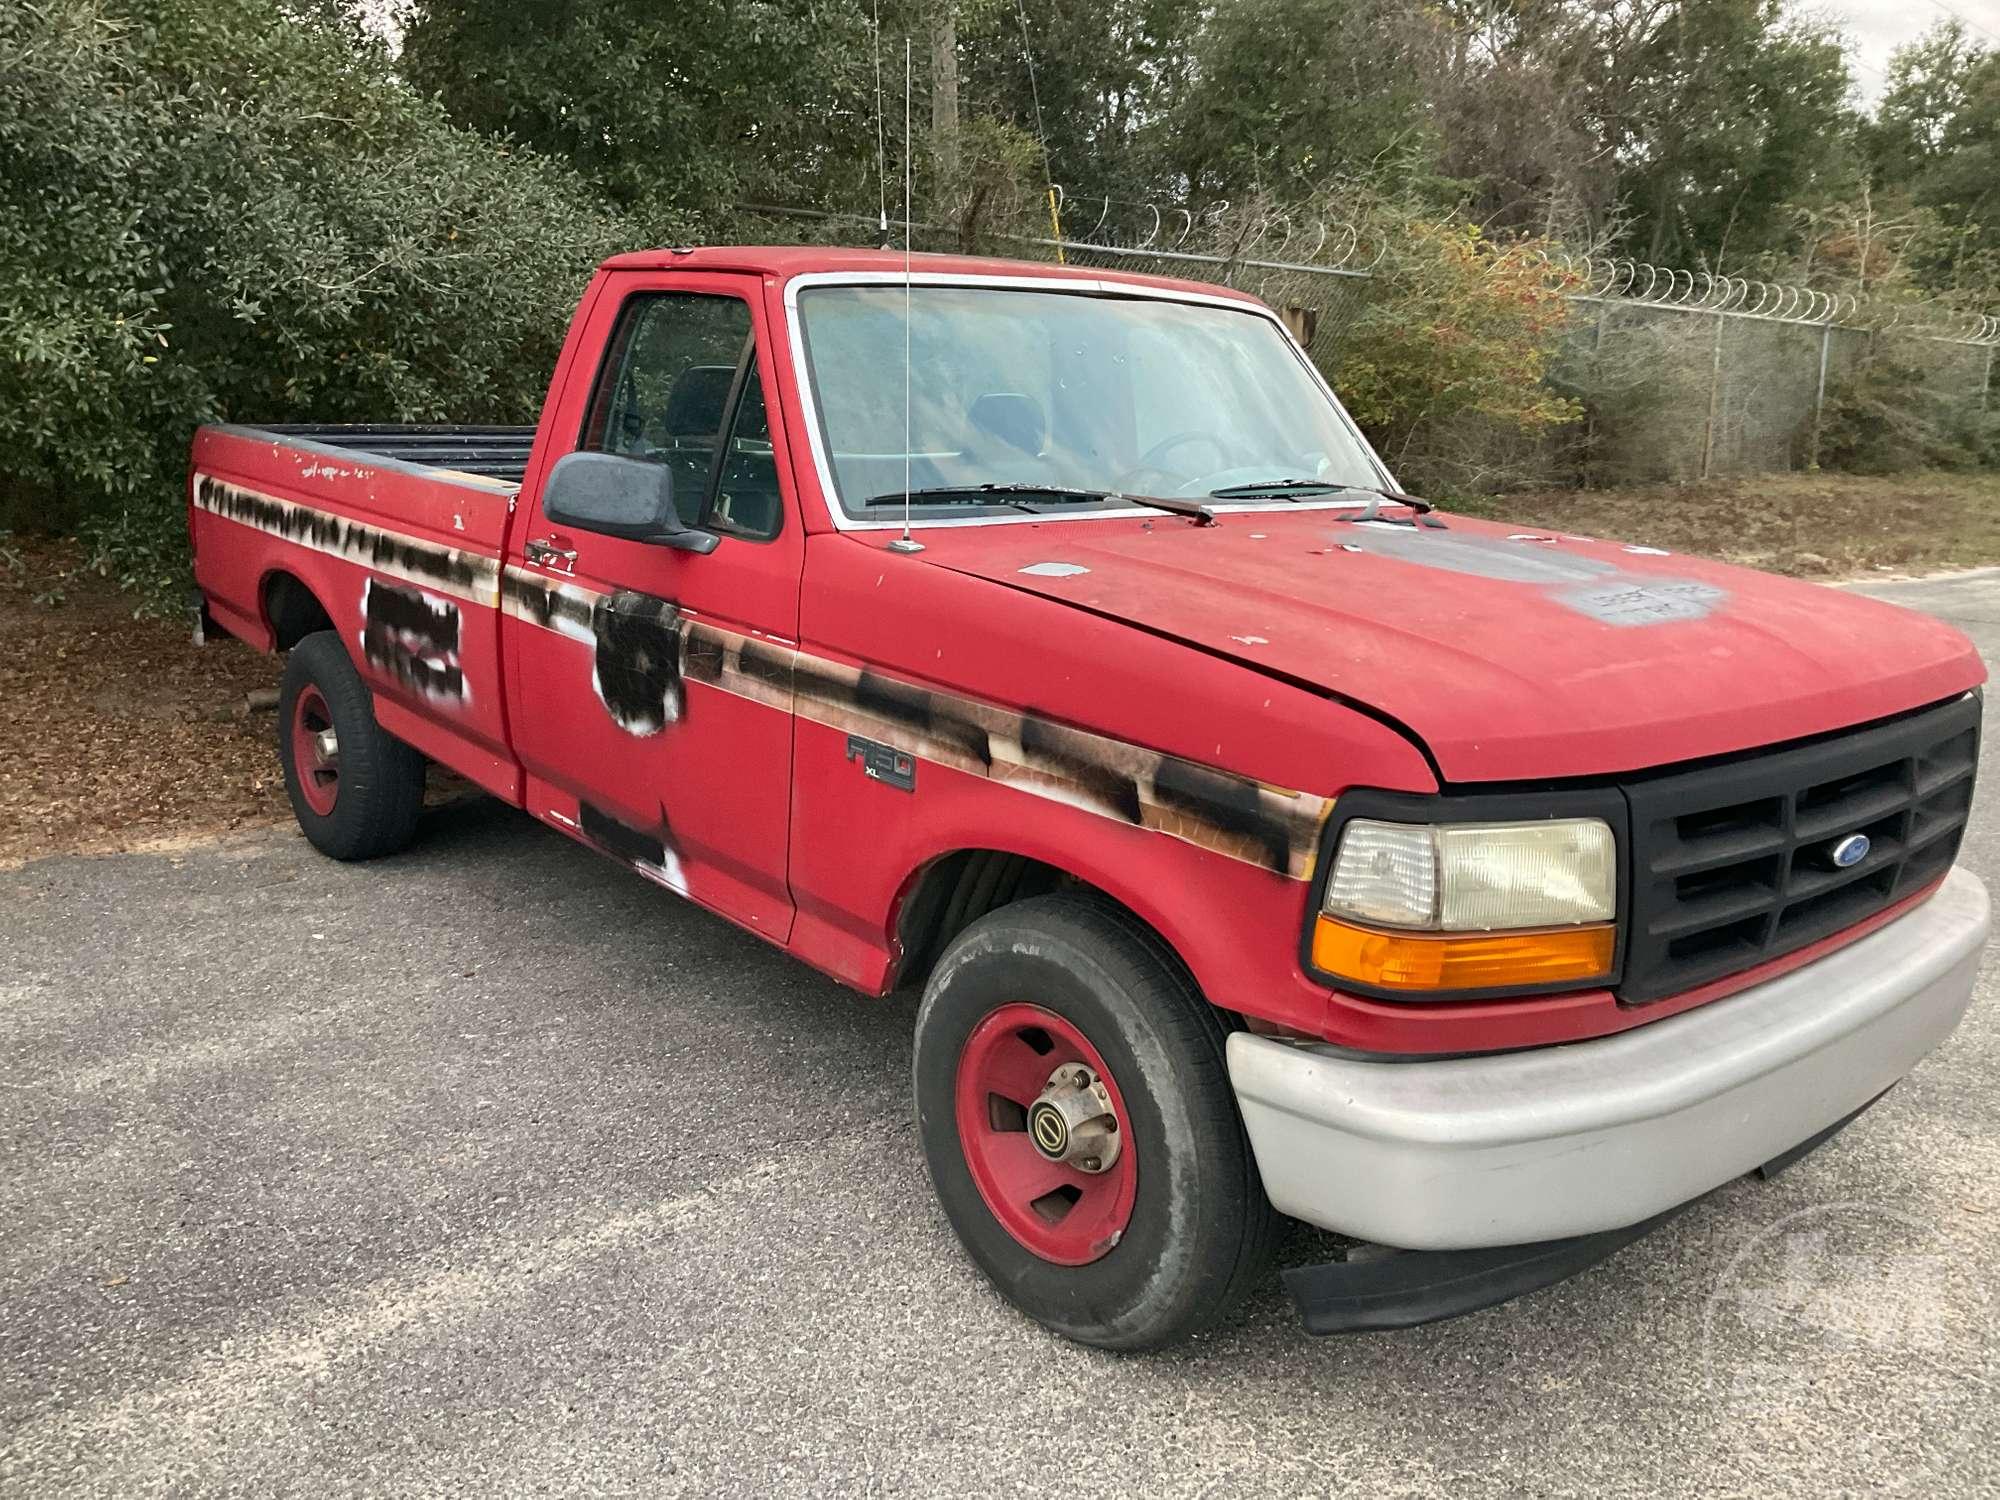 1995 FORD F-150 XL VIN: 1FTEF15Y5SNA96870 S 1/2 TON PICKUP